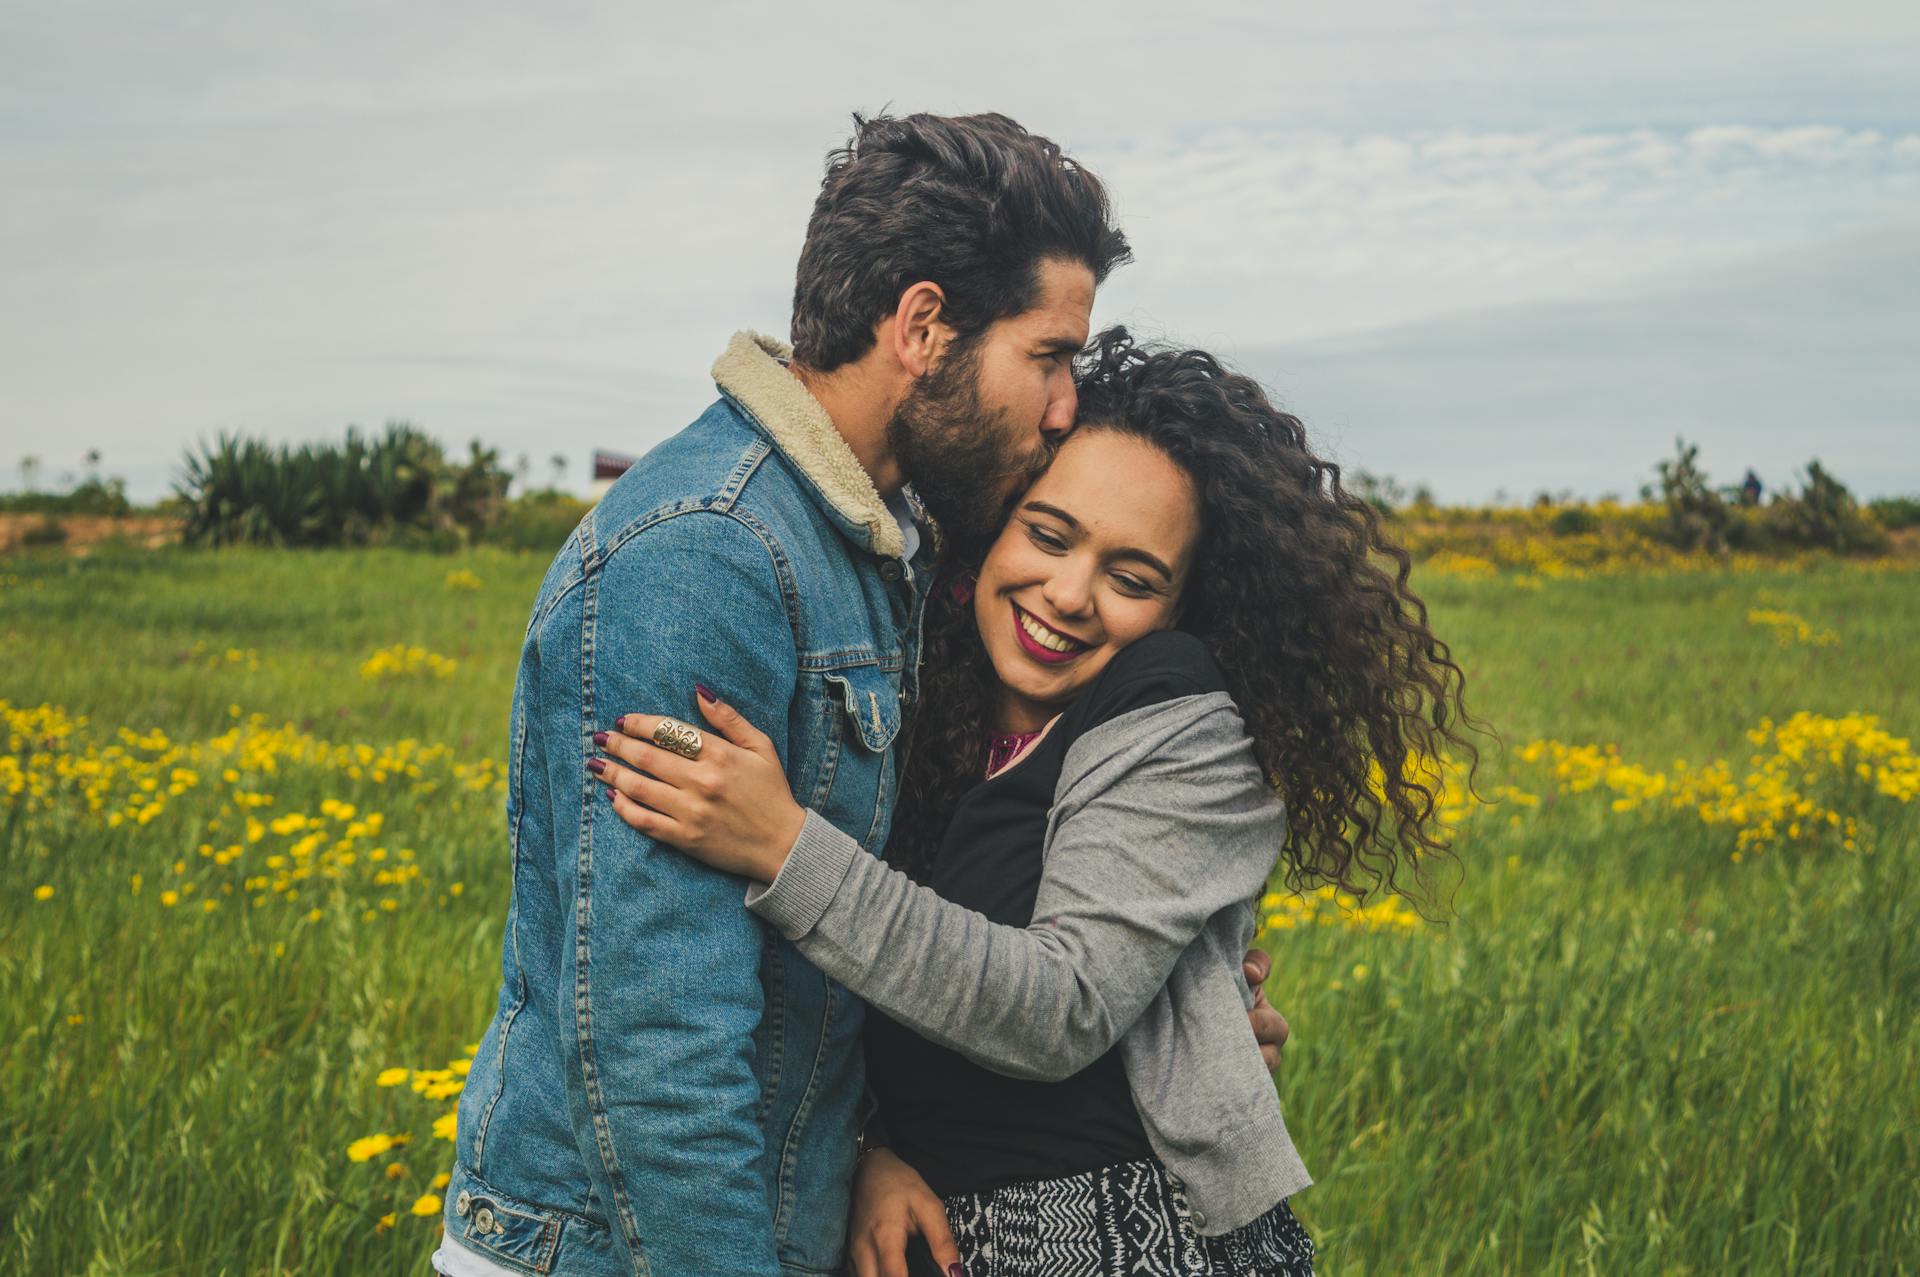 A young couple smiling in a field | Source: Pexels